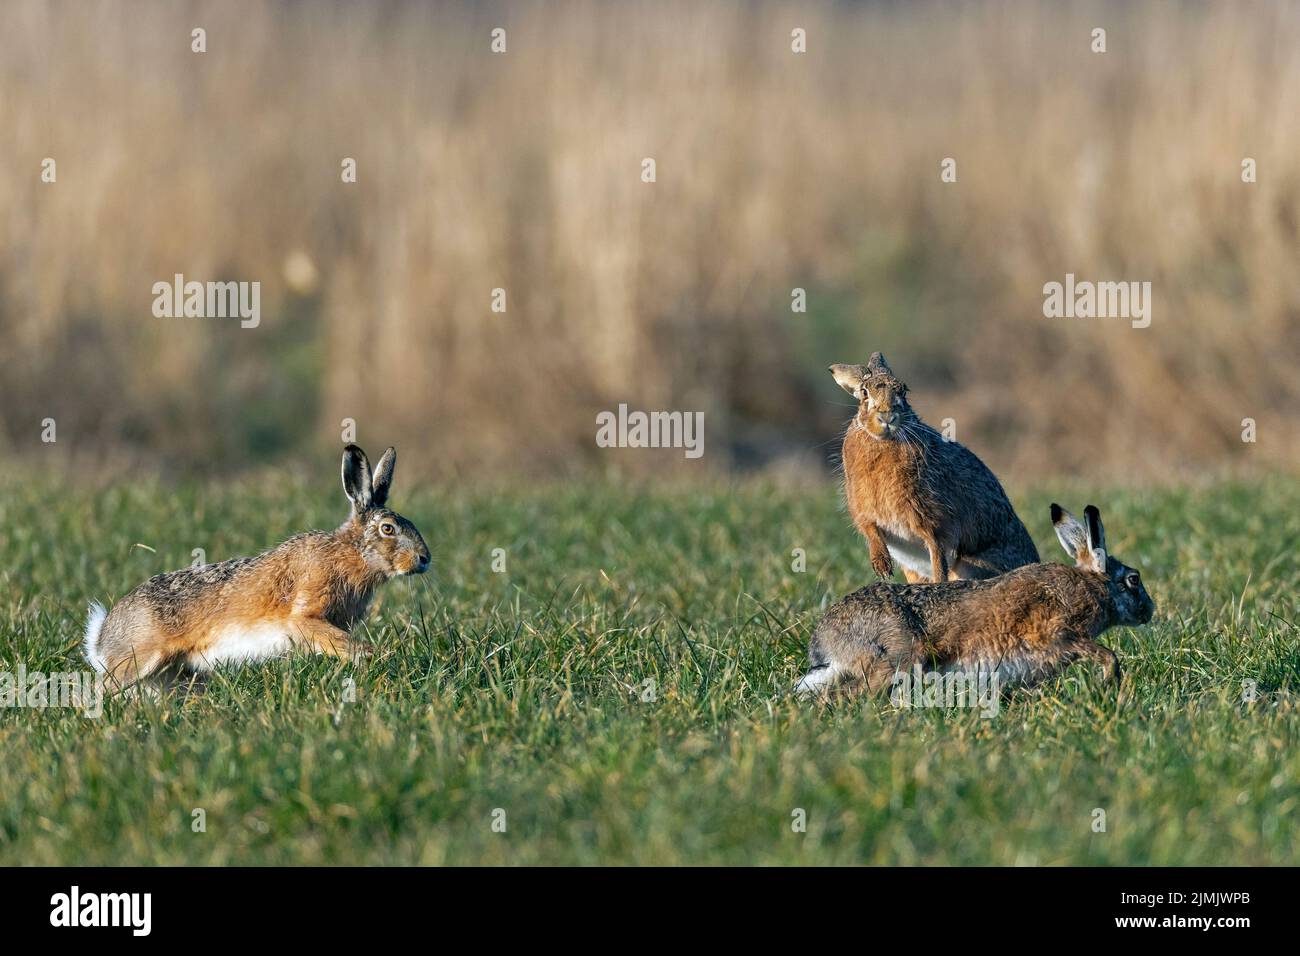 In a wild cursorial hunting, the male European Hares encircle the female Stock Photo